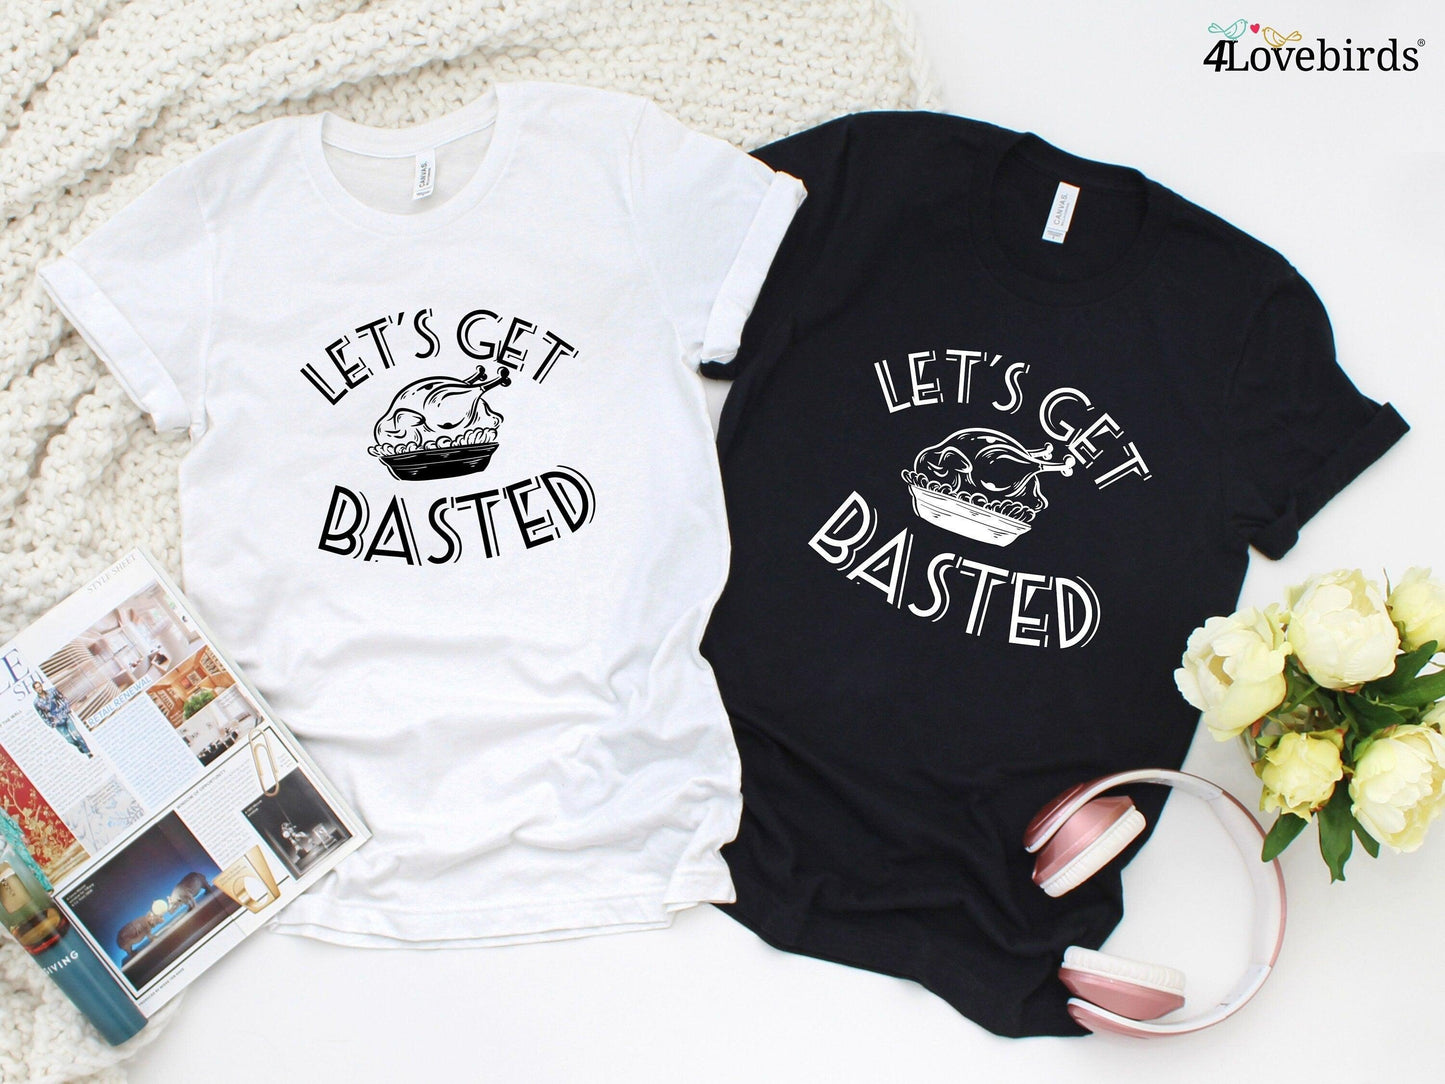 Let's Get Basted Thanksgiving Hoodie - Funny Thanksgiving Shirts - Group Thanksgiving Shirts - Turkey Shirt - Matching Shirts - Drinking Tee - 4Lovebirds